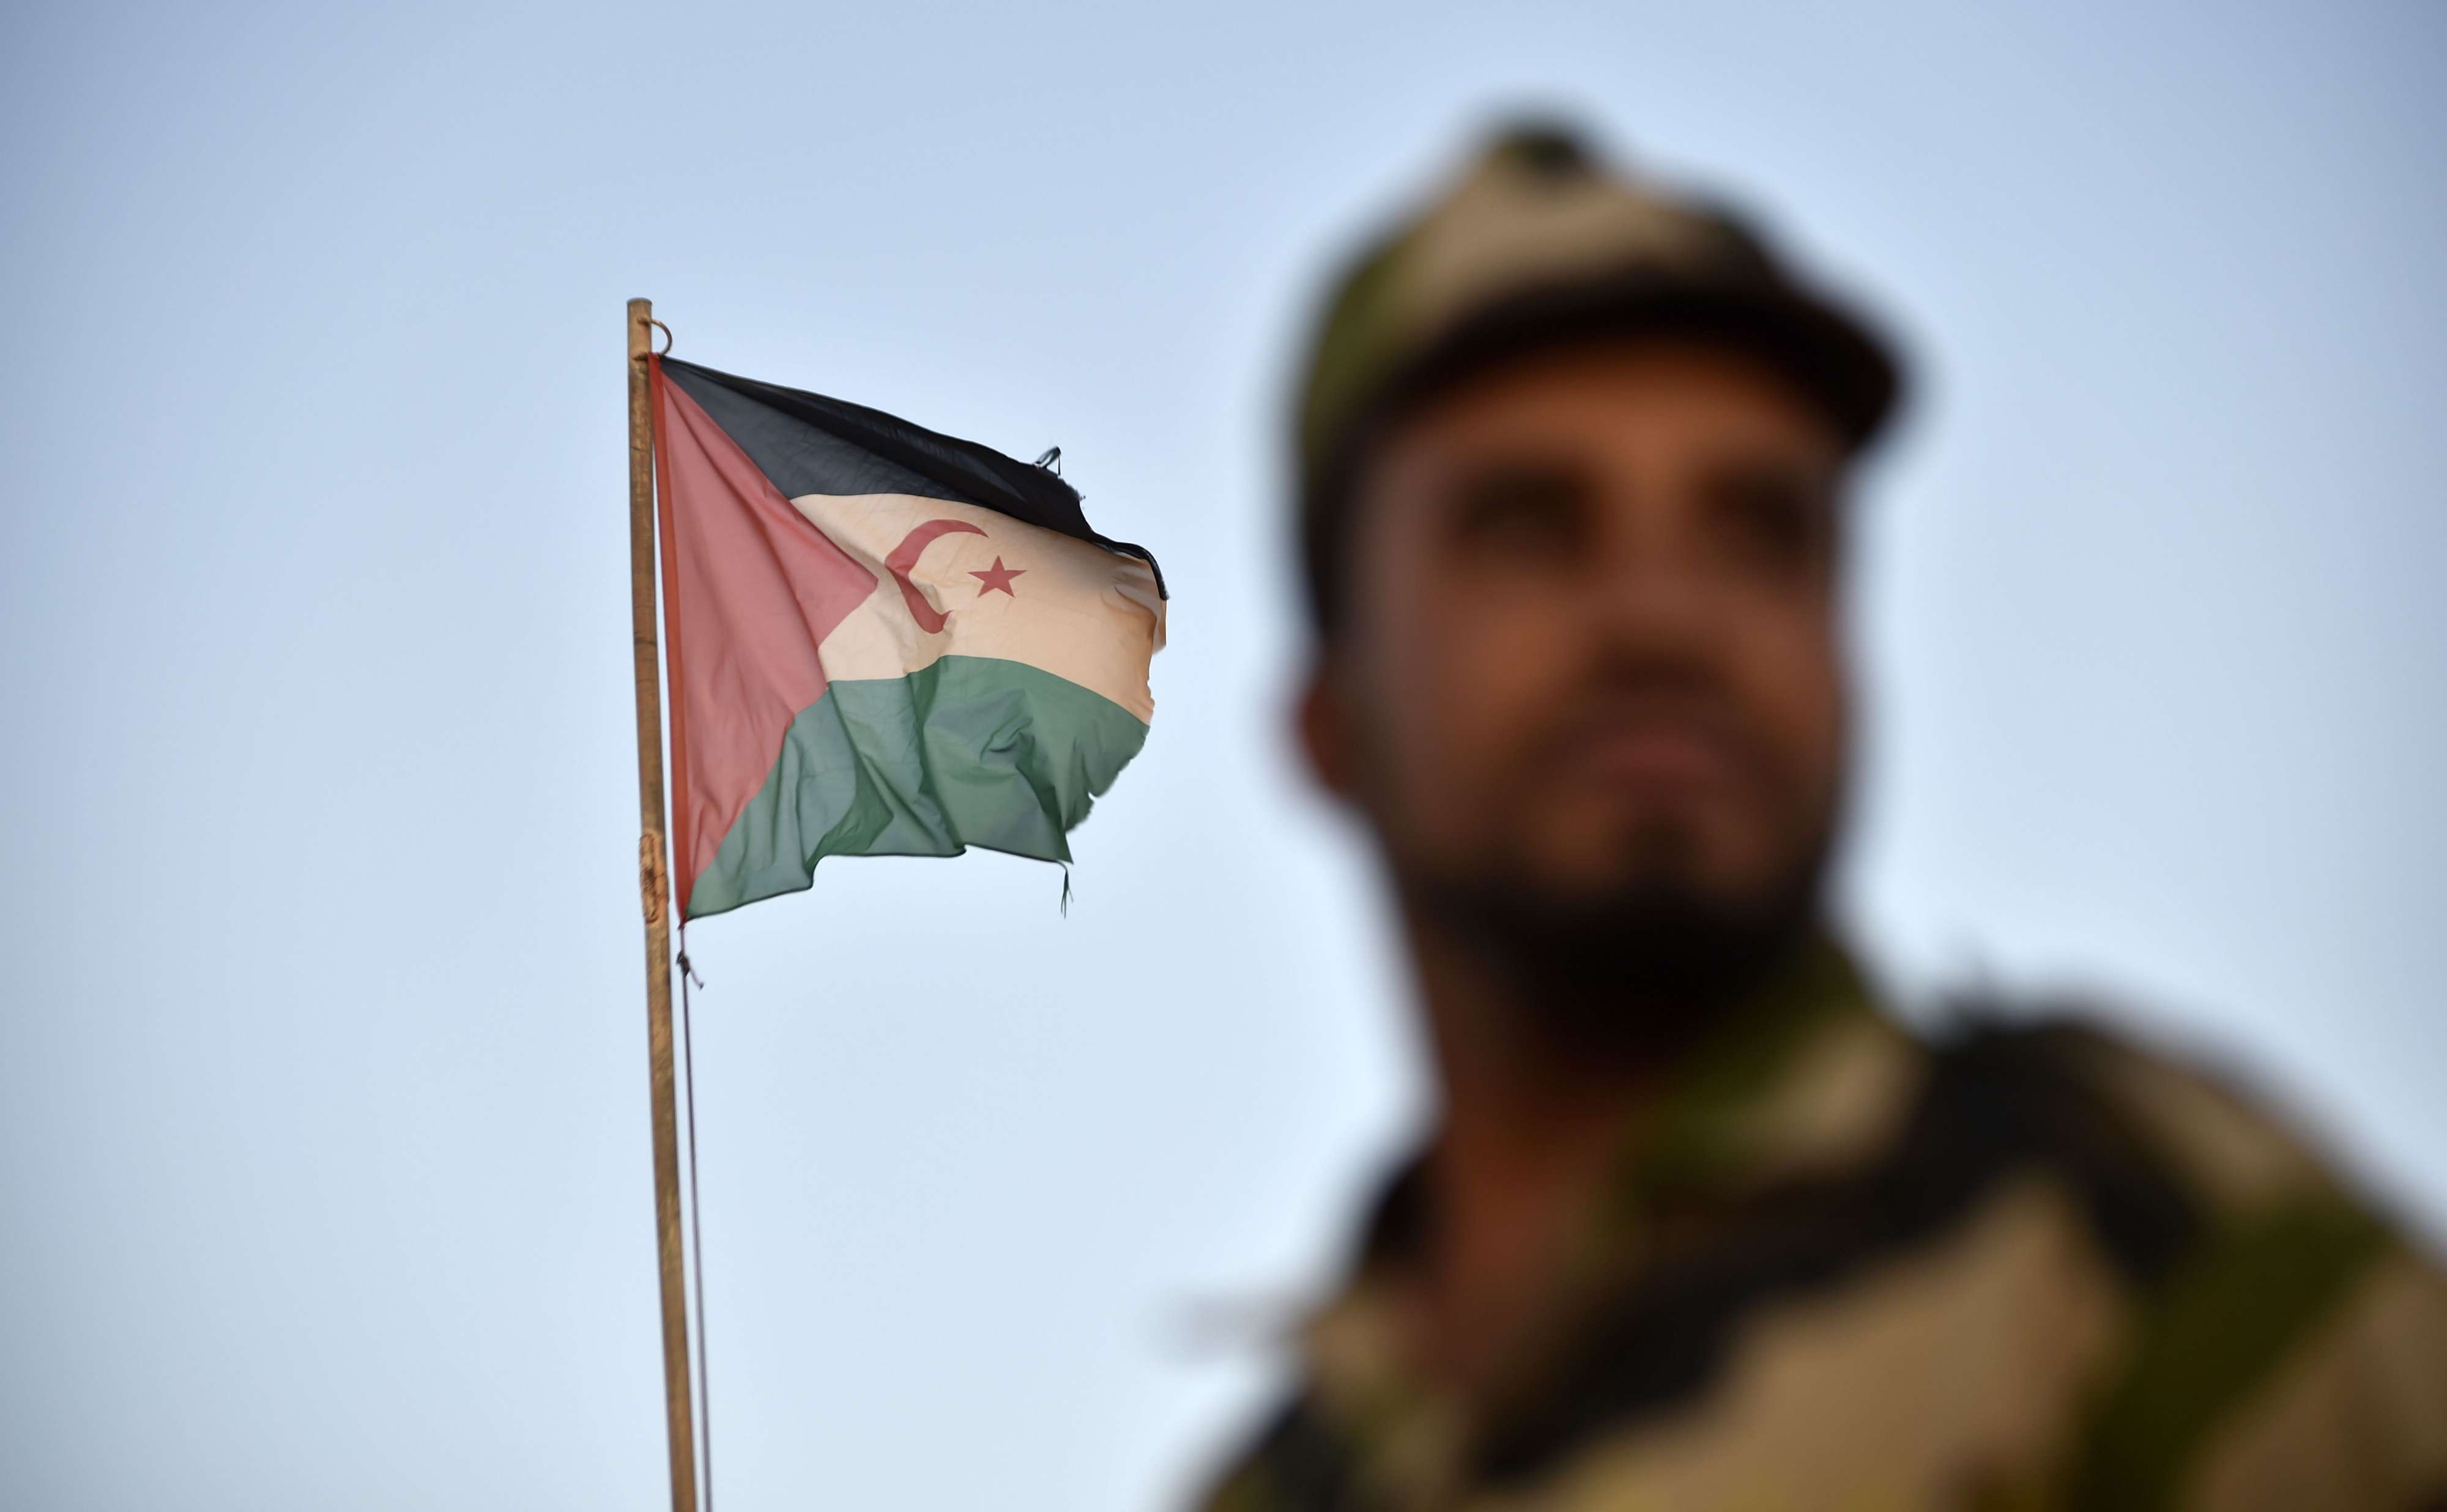 Uniformed soldiers of the pro-independence Polisario Front stand before a Sahrawi flag.